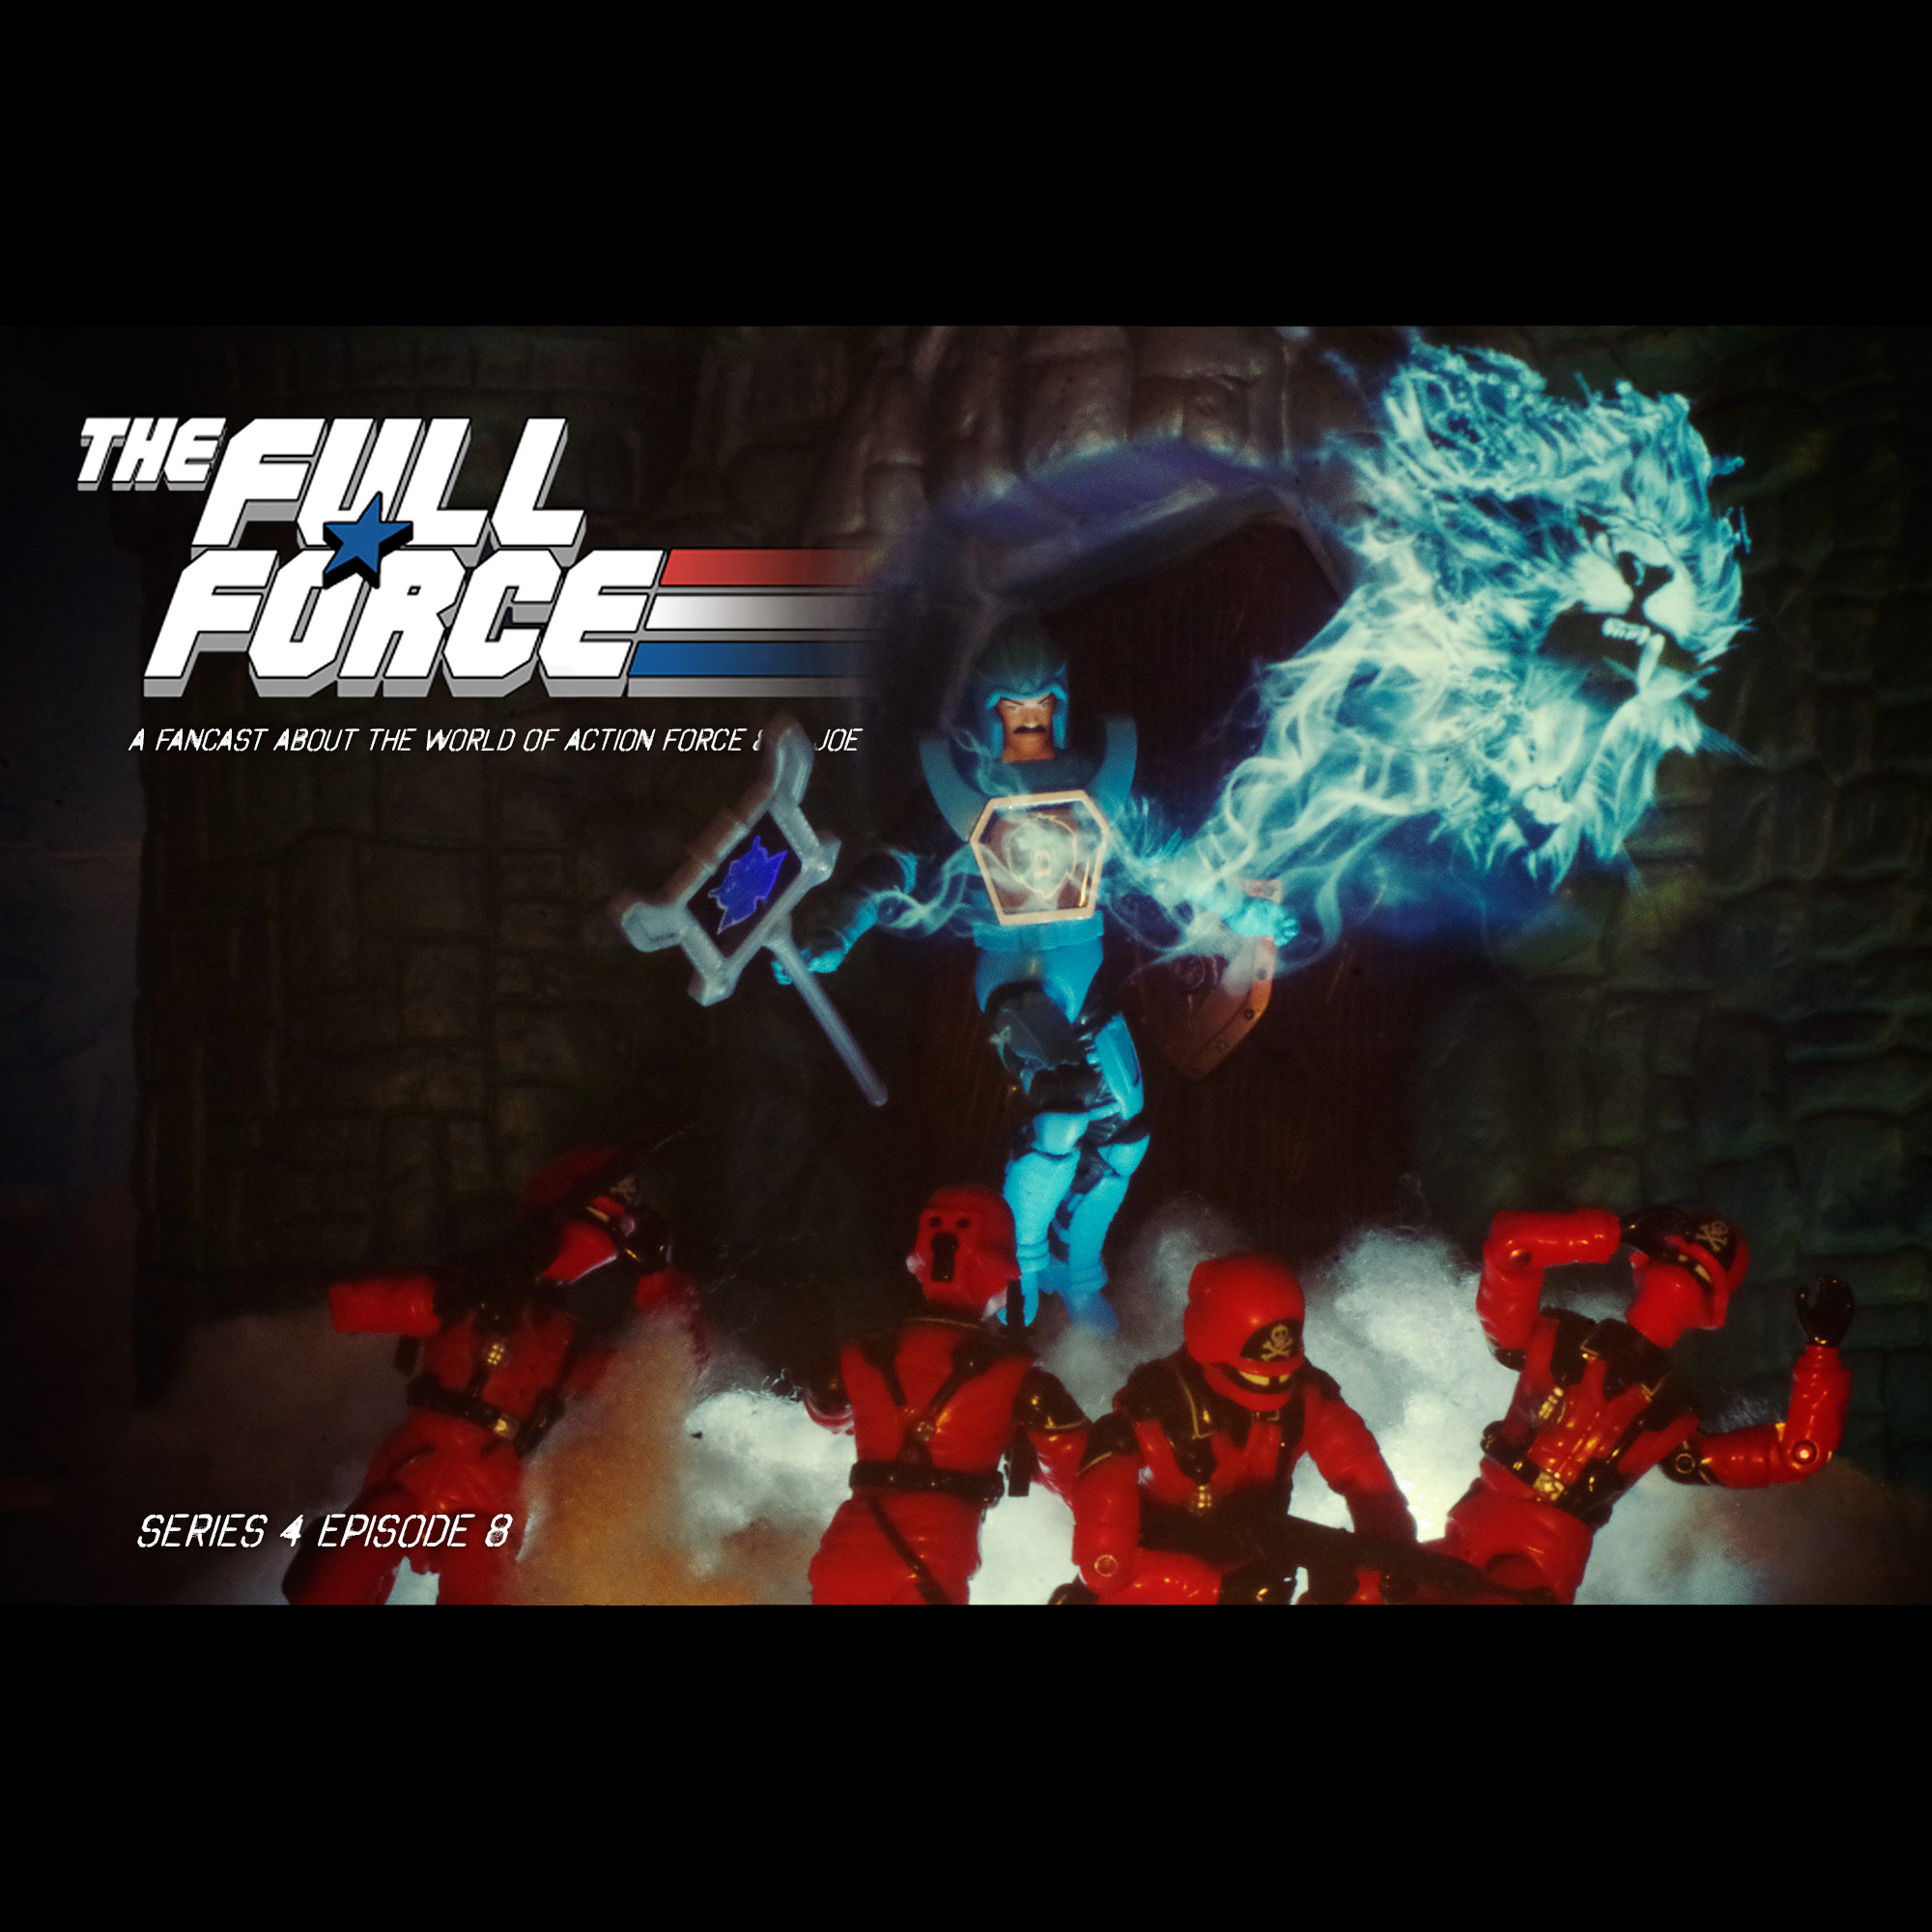 The Full Force Series 4 Episode 8